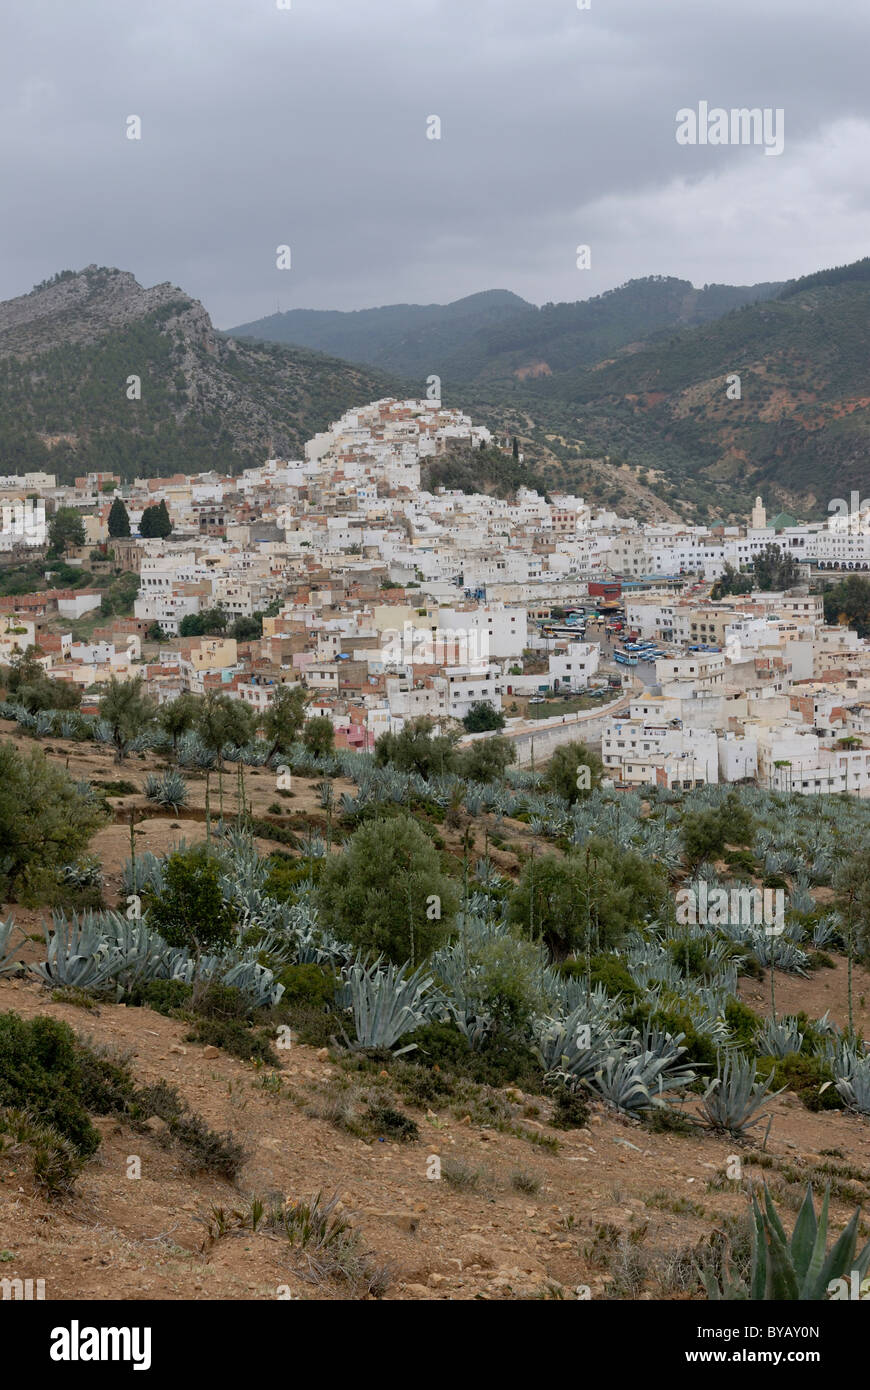 View of Moulay Idris, one of the holy cities of Islam, Morocco, Africa Stock Photo